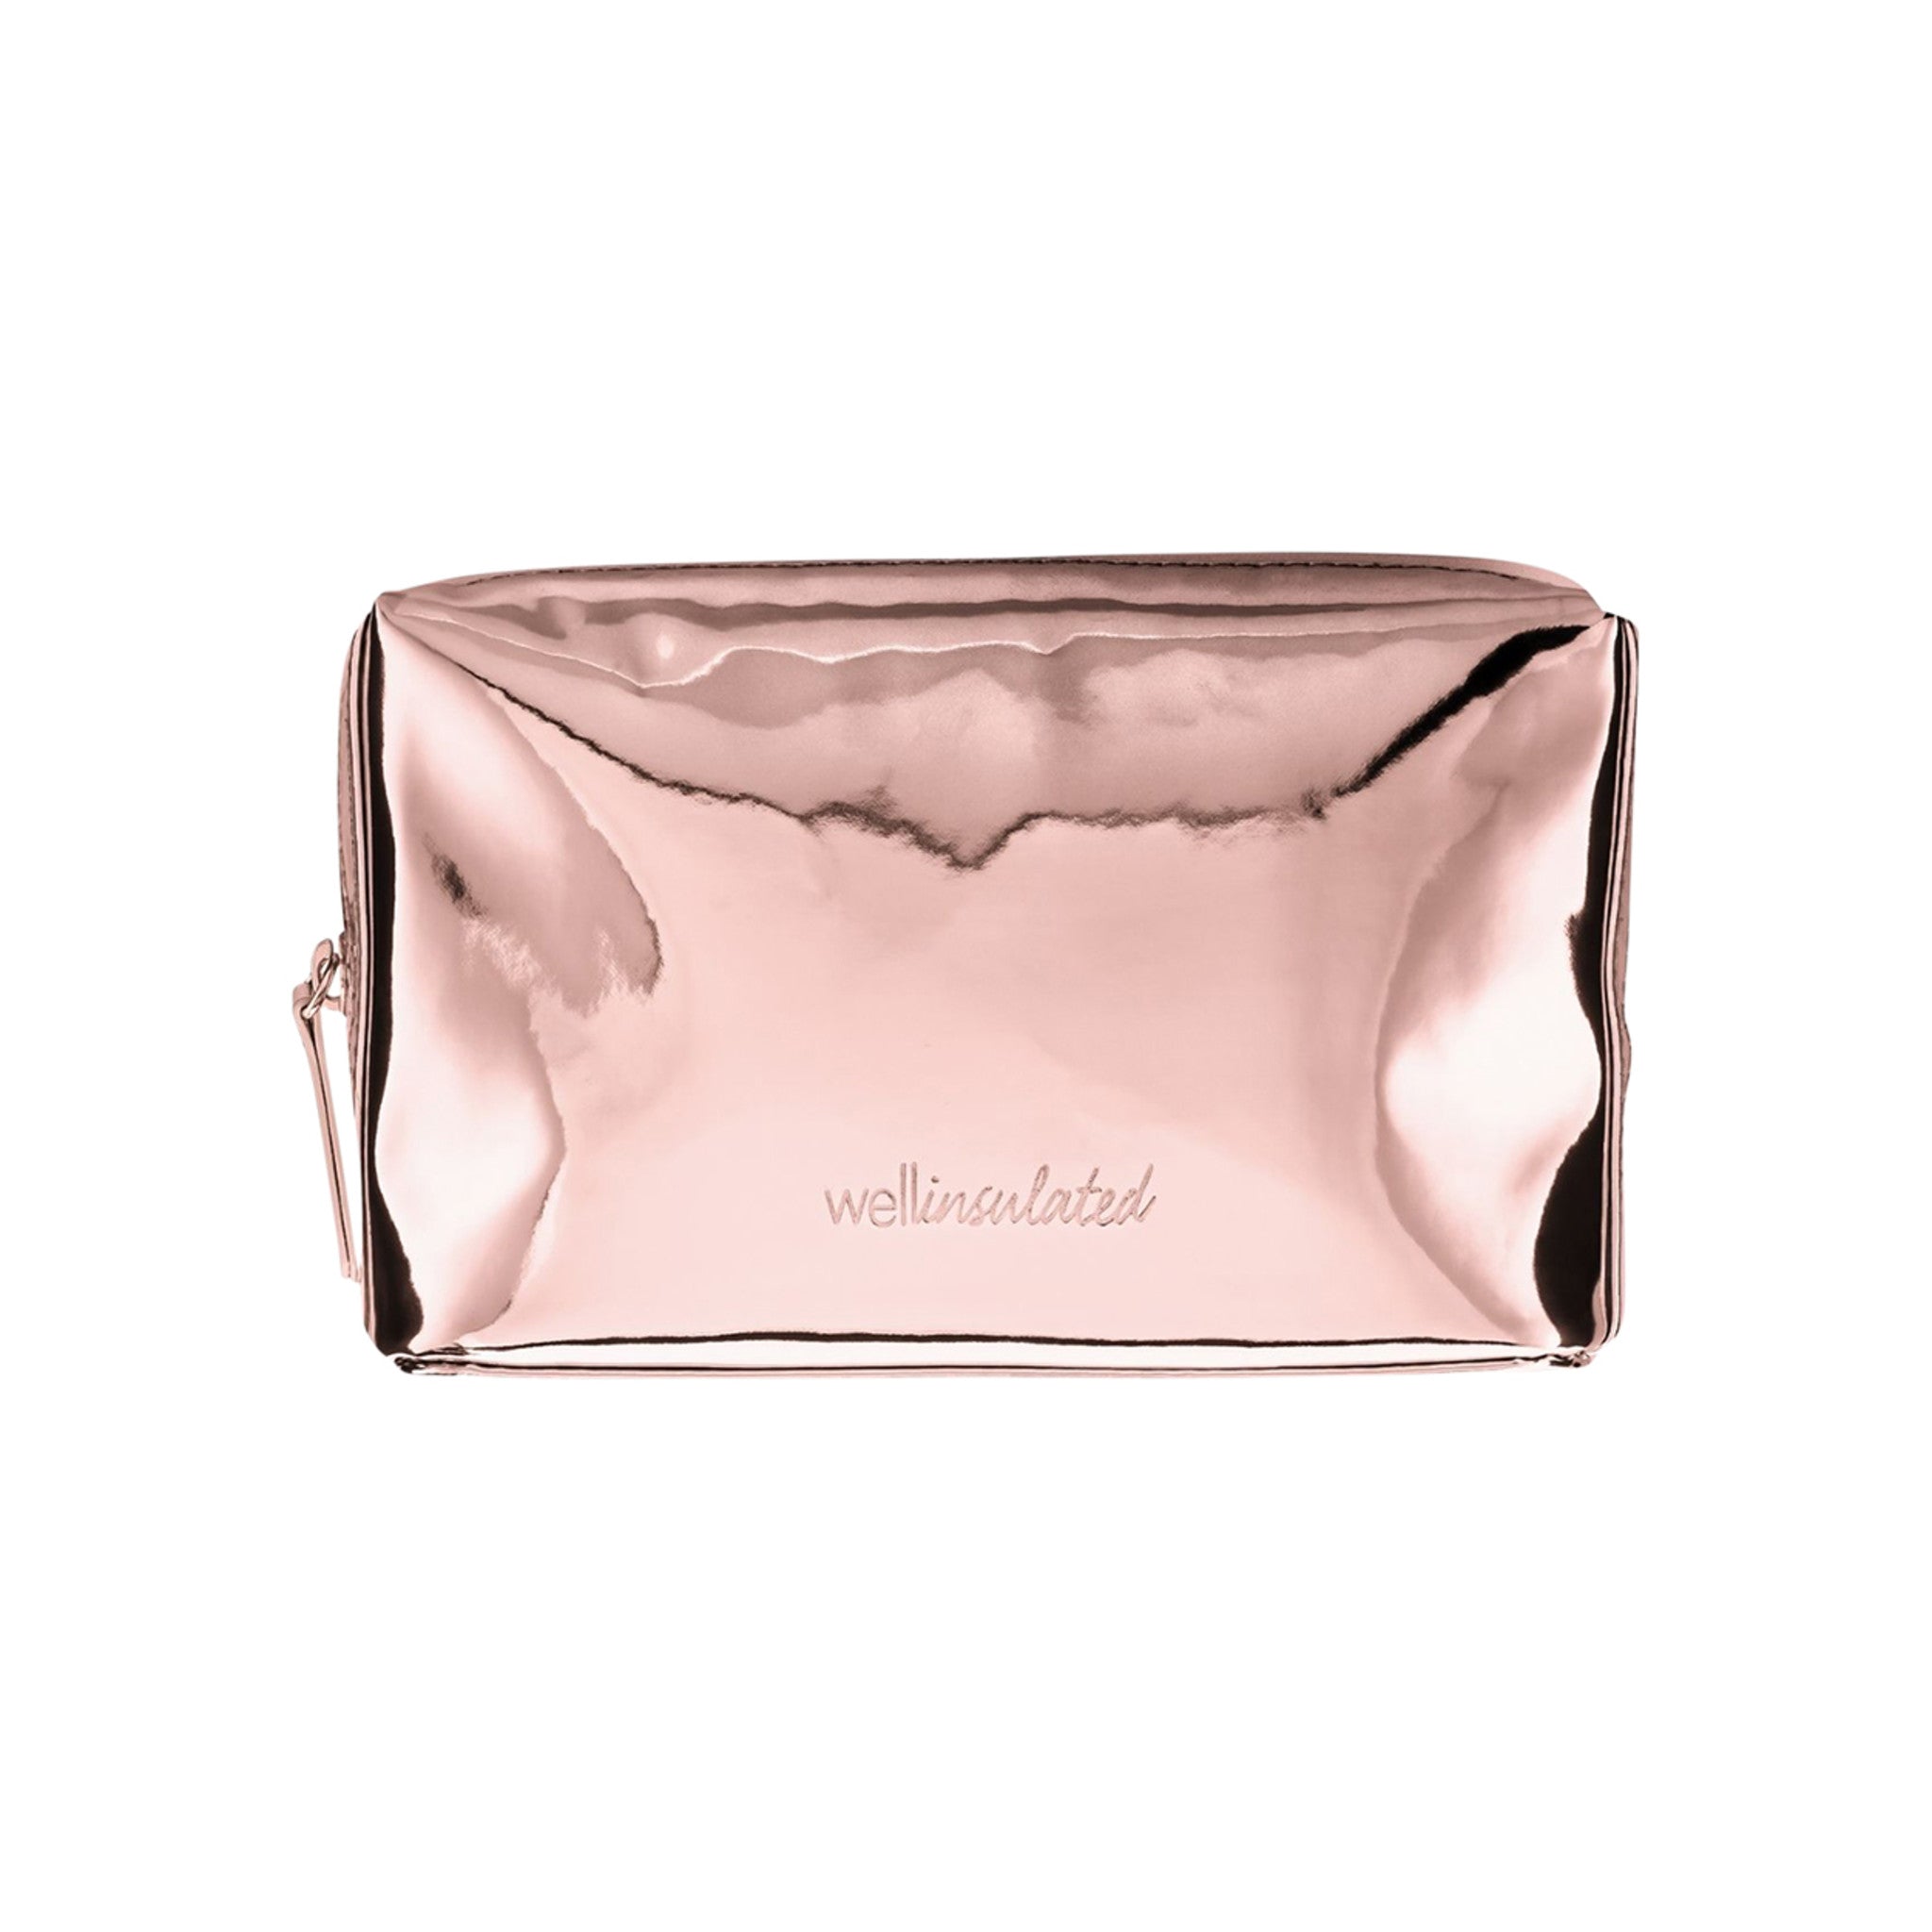 Wellinsulated Performance Beauty Bag Color/Shade variant: Rose Gold main image.